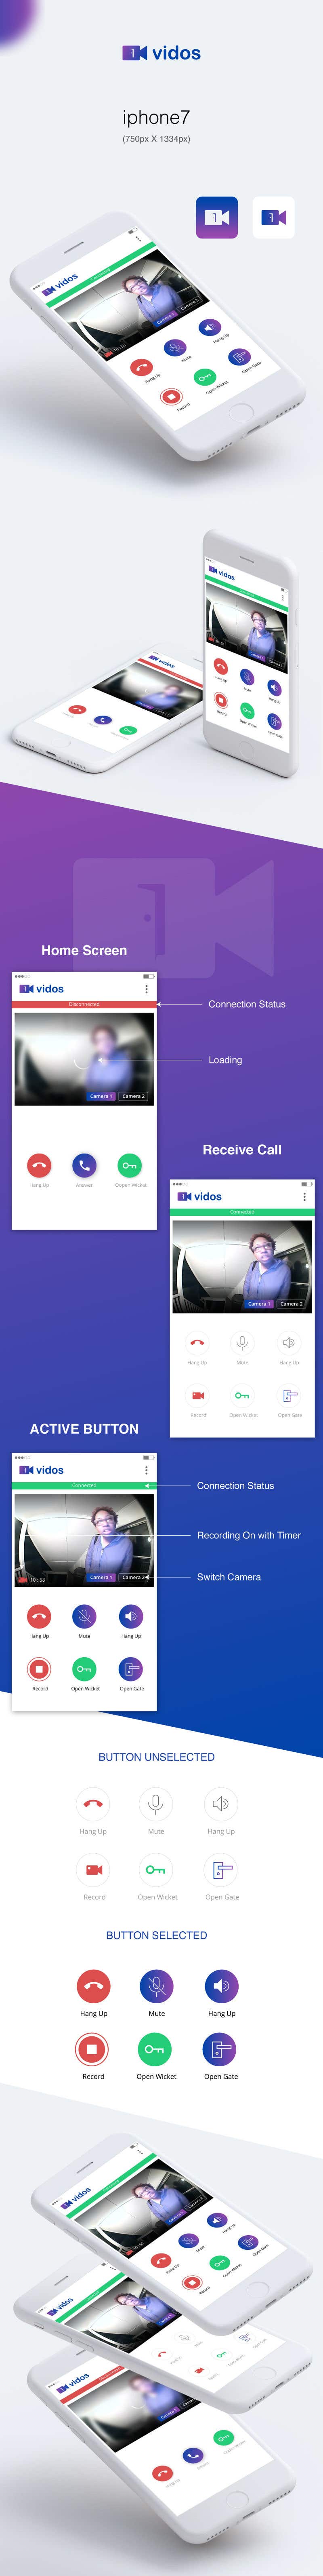 Contest Entry #4 for                                                 Design an Mockup for Video Doorbell App
                                            